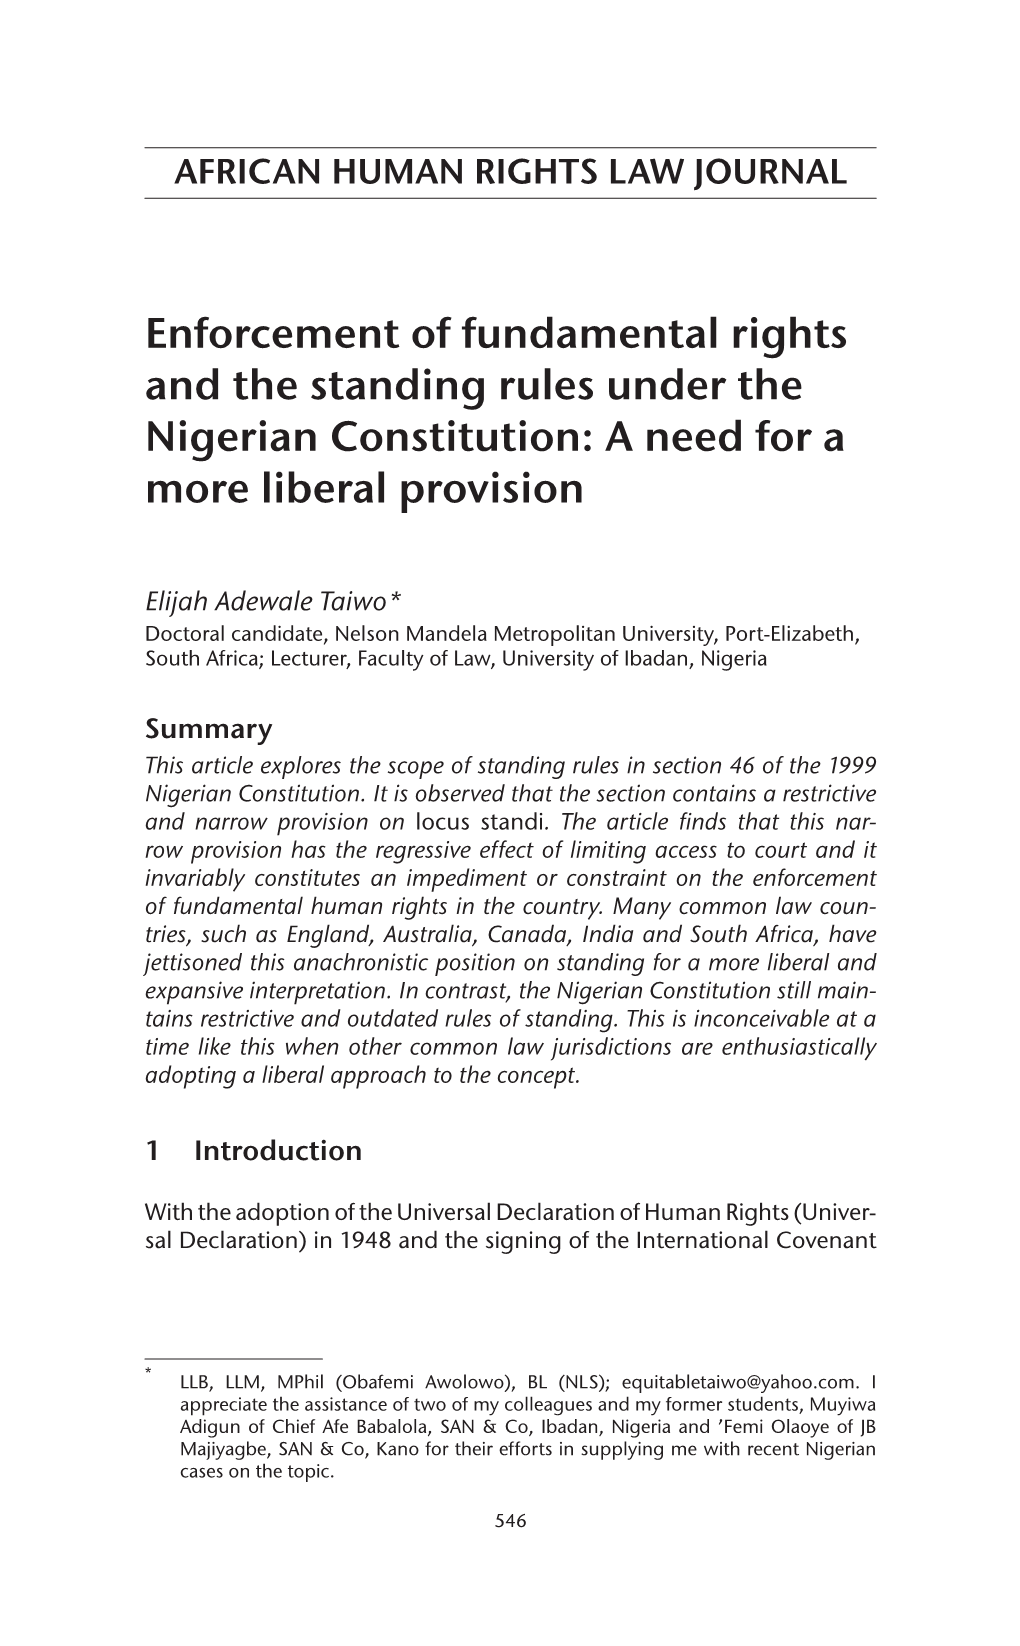 Enforcement of Fundamental Rights and the Standing Rules Under the Nigerian Constitution: a Need for a More Liberal Provision